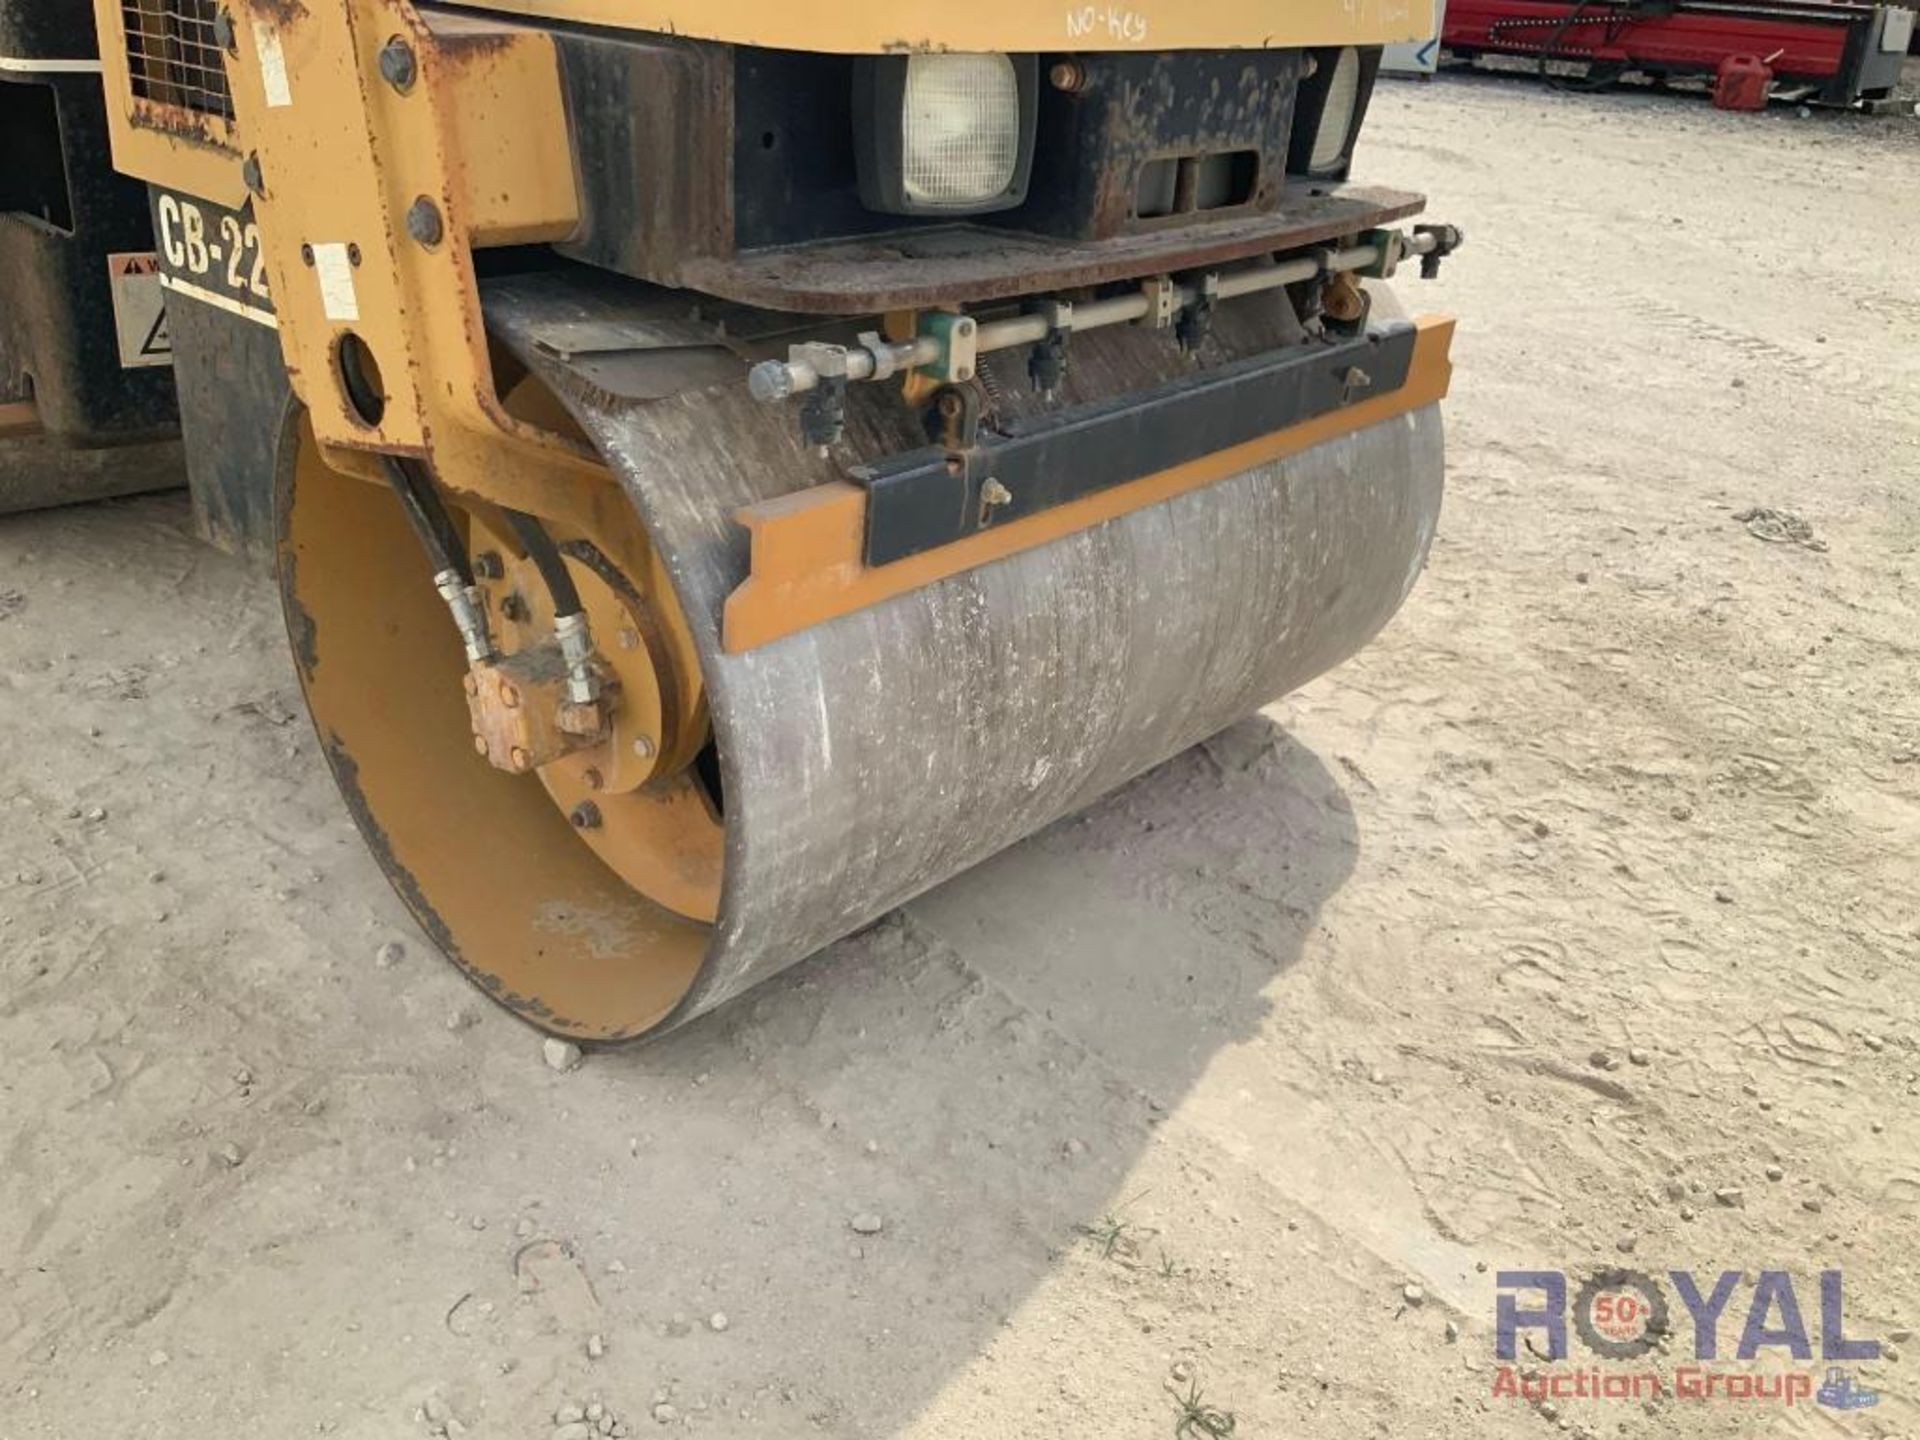 2003 Caterpillar CB224D 47 Inch Double Drum Roller - Image 16 of 19